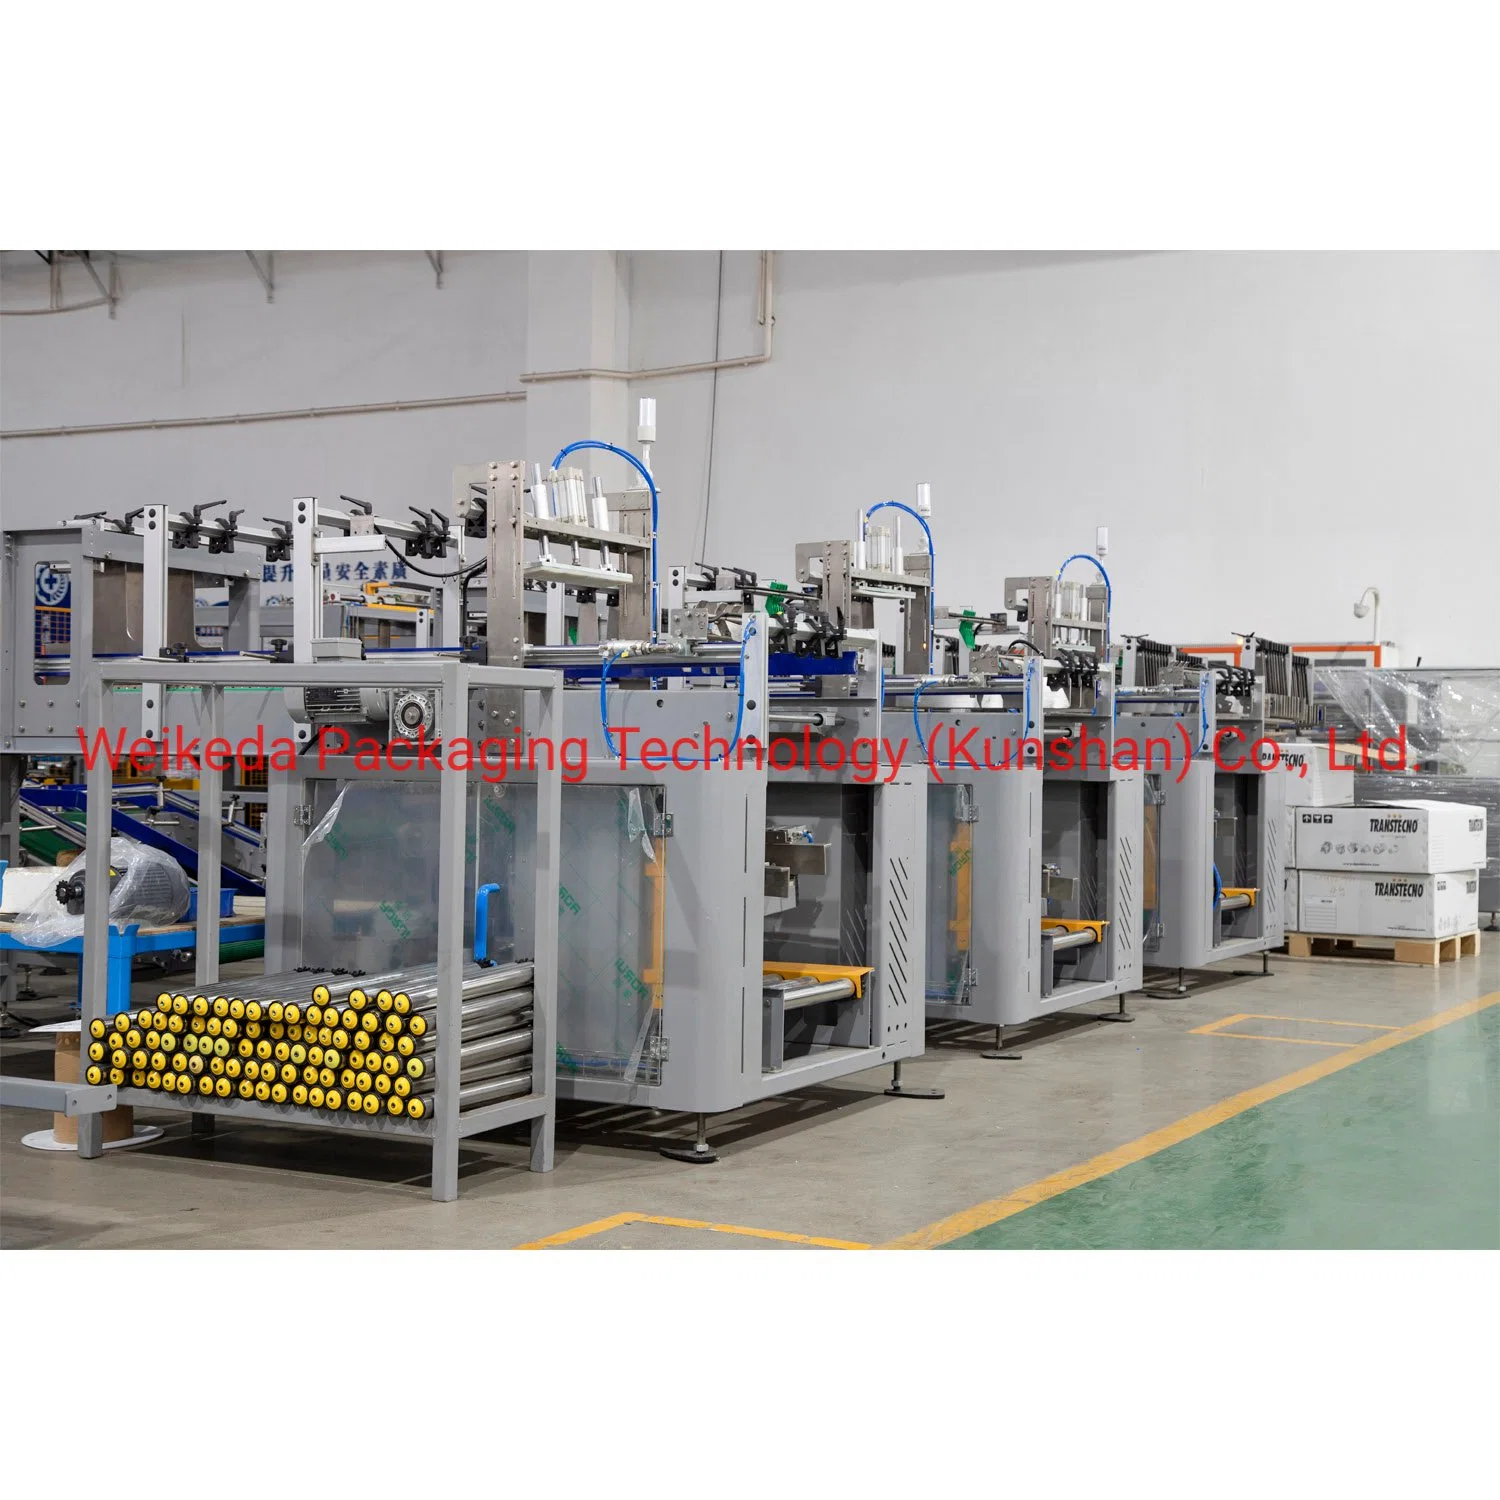 Top Load Packaging Machine y Automatic Case Packer Packaging Packaging Máquina